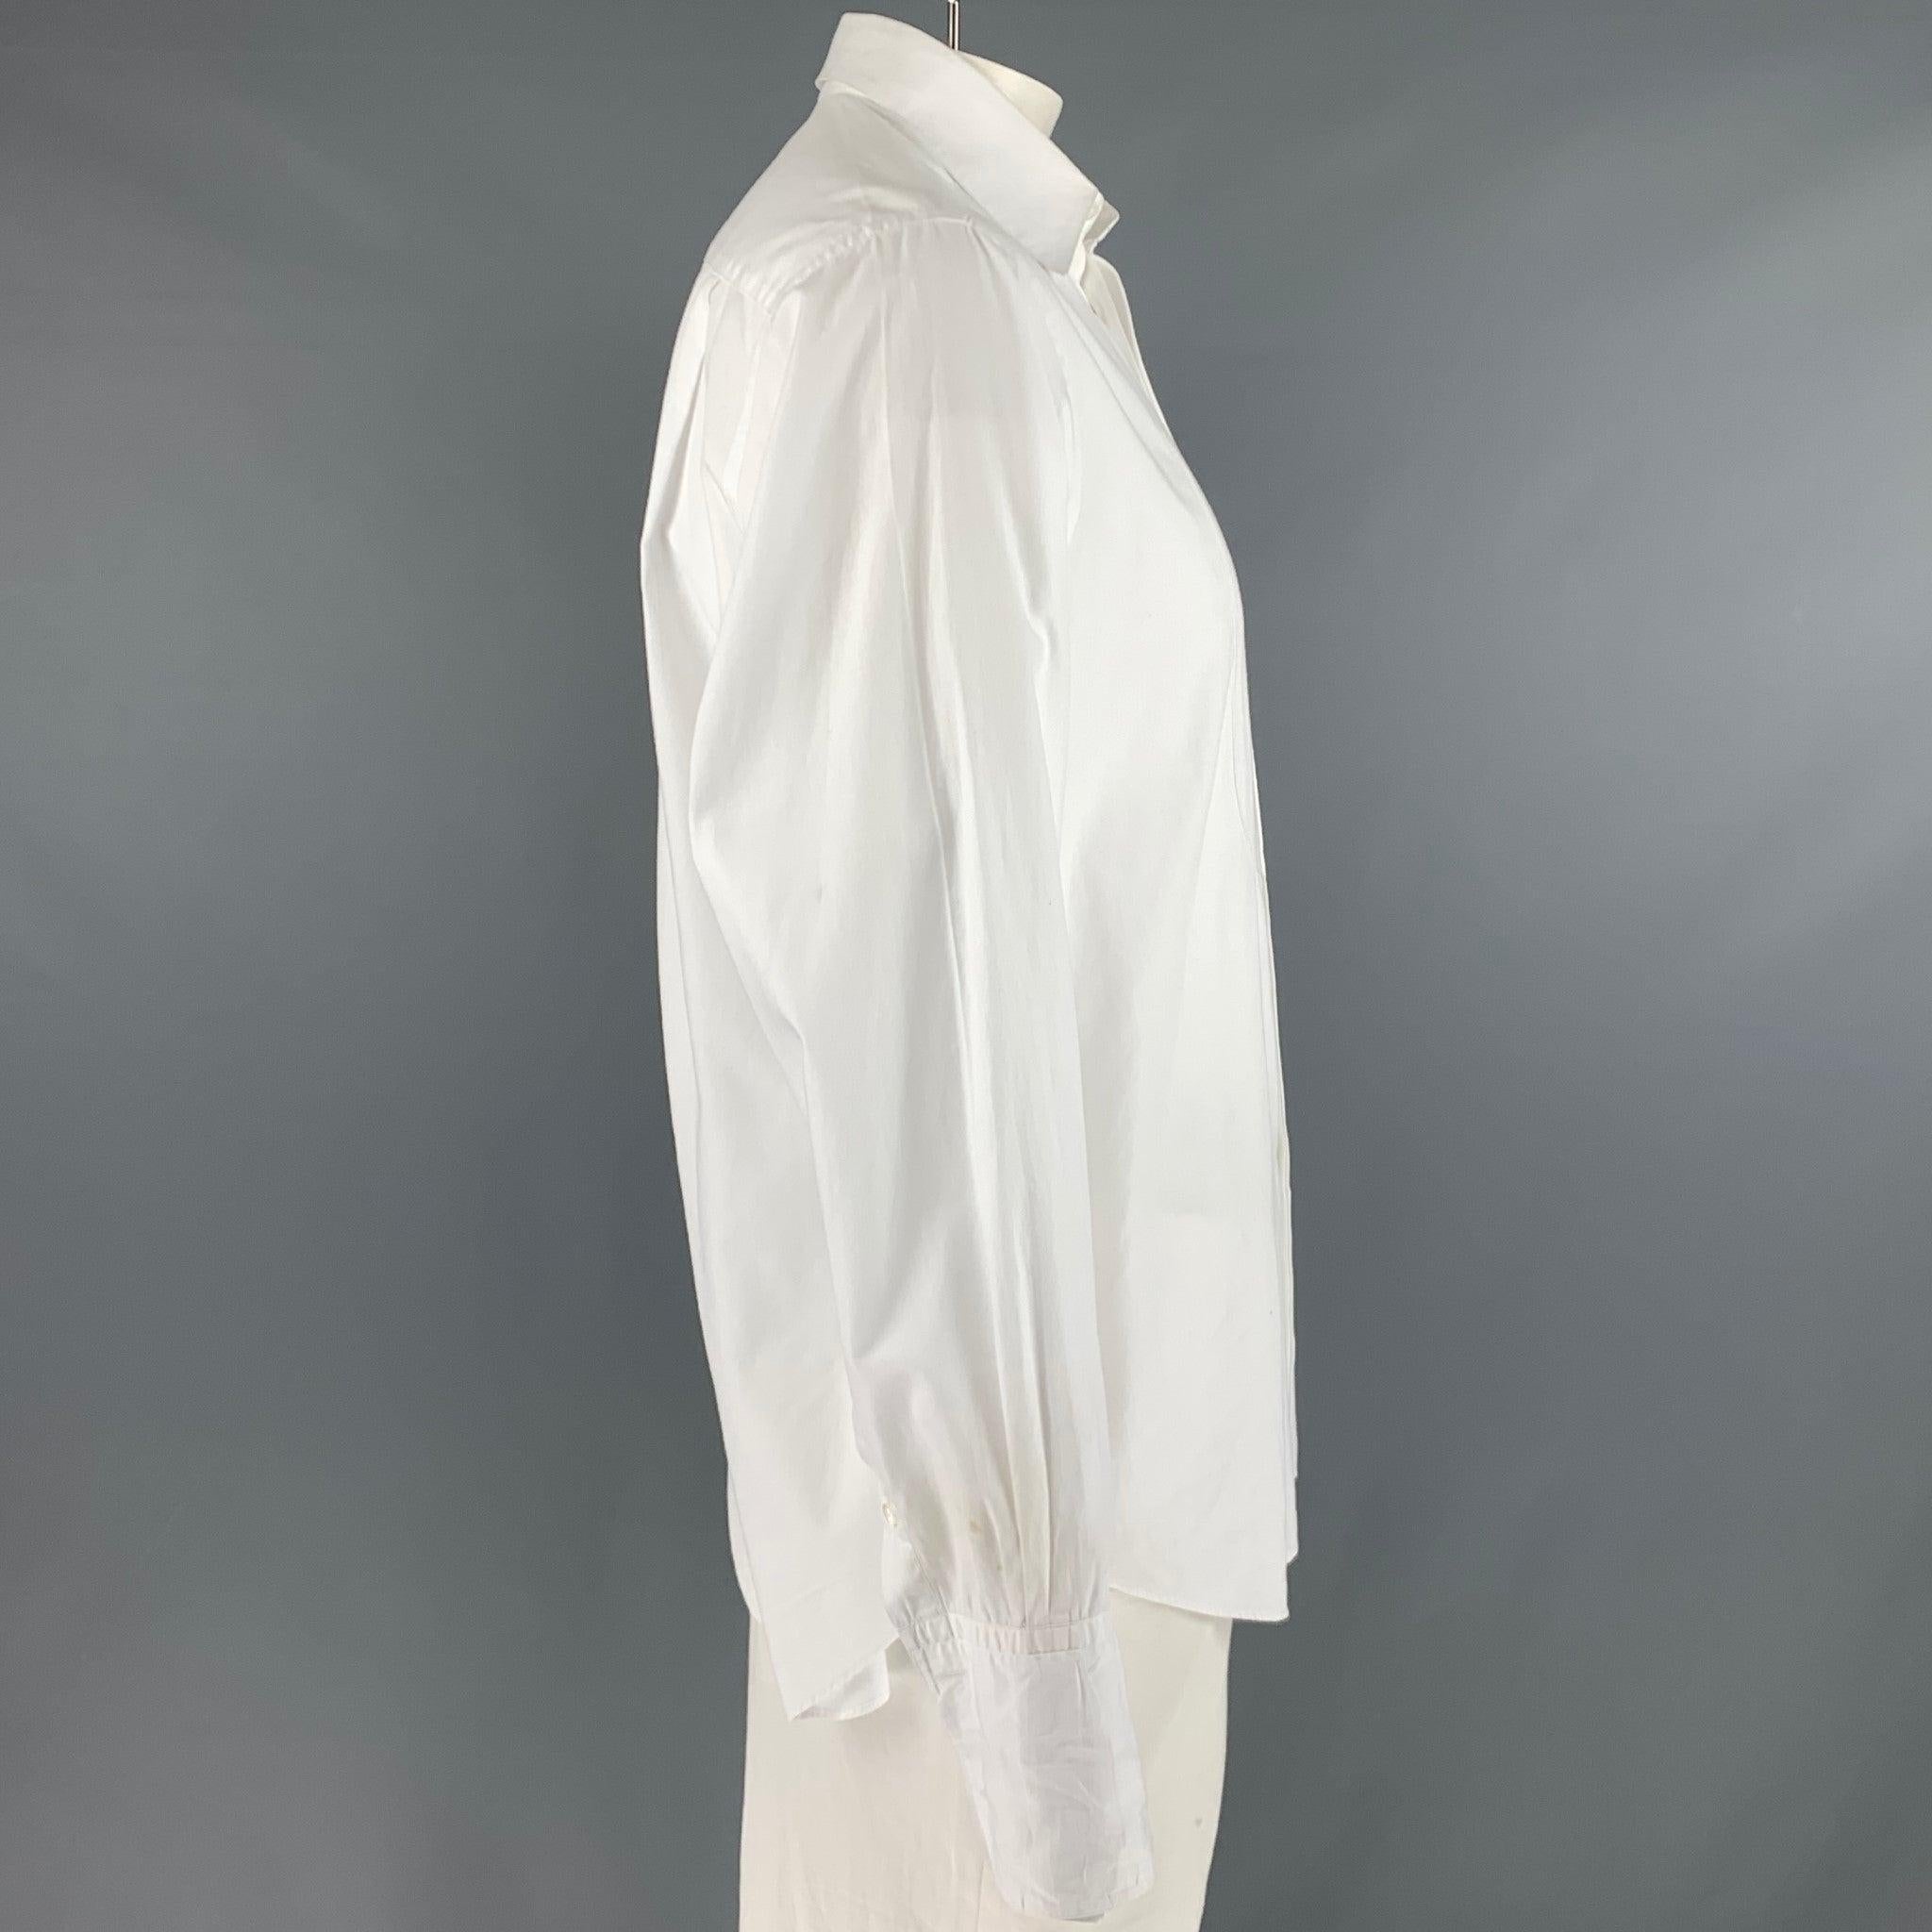 ARMANI COLLEZIONI tuxedo long sleeve shirt comes in a white cotton featuring french cuffs, spread collar, and a hidden placket closure. Made in Italy.
Good Pre-Owned Condition. Small marks at right sleeve, underarms, and collar. As-Is.  

Marked:  